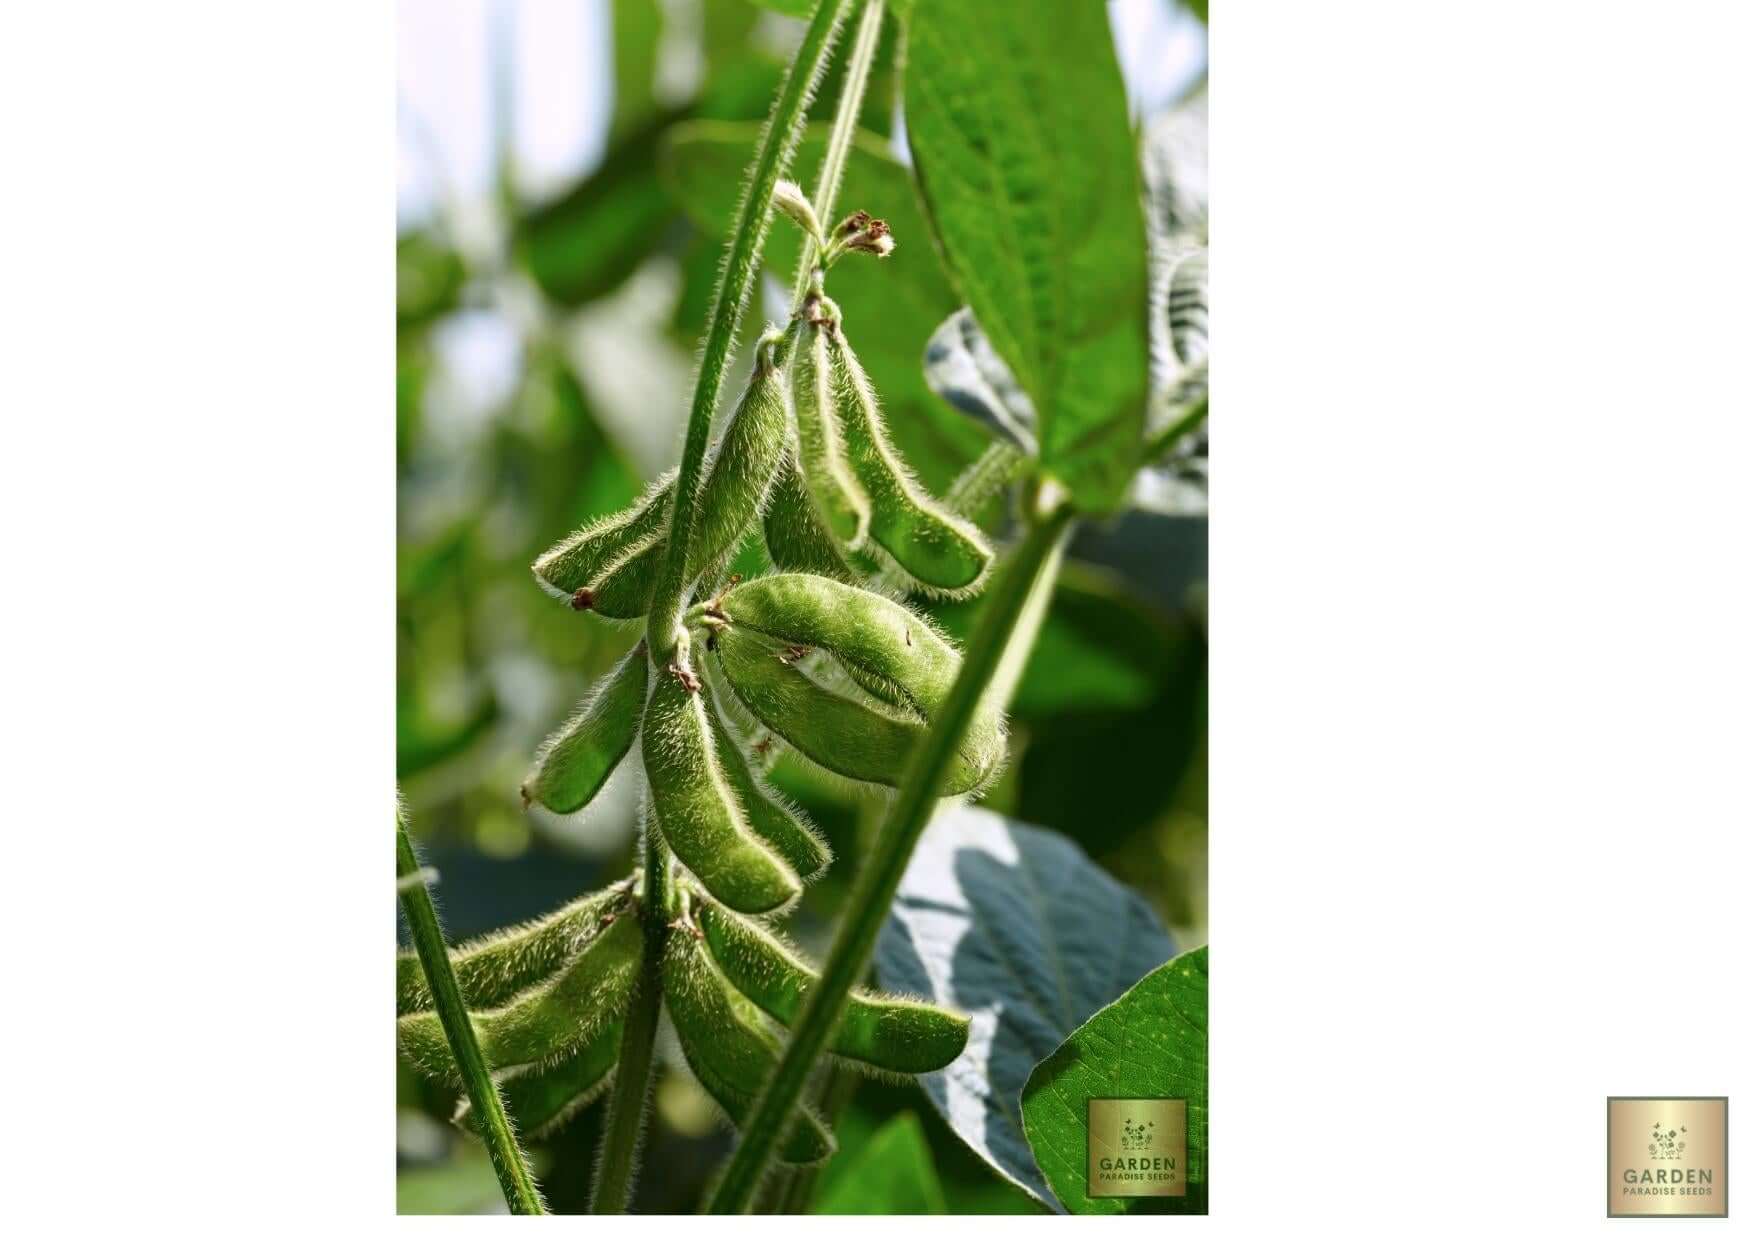 Homegrown Goodness: Get Soybean Seeds for Nutritious and Delicious Meals